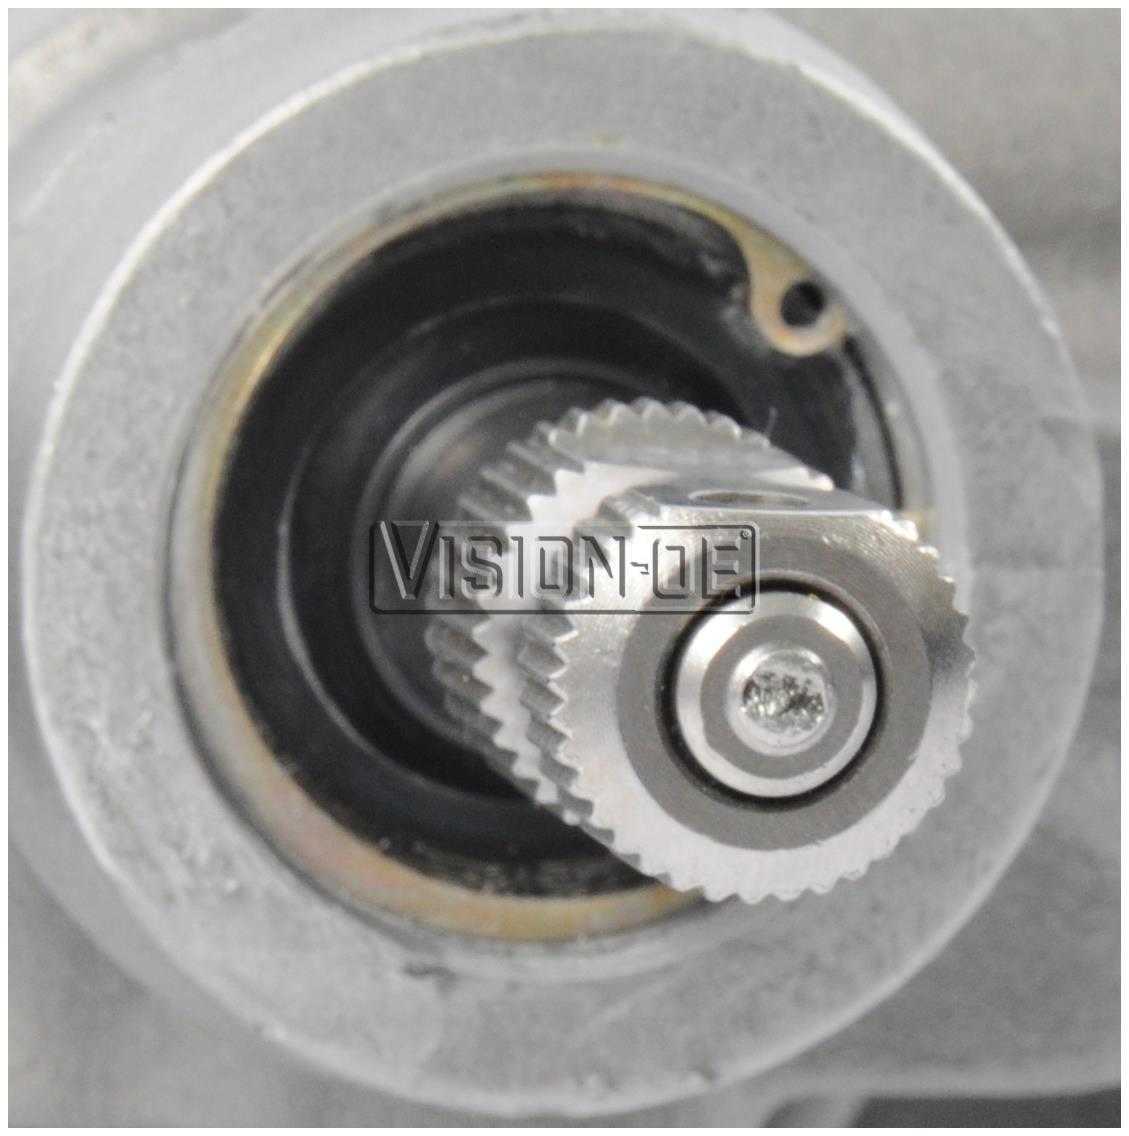 VISION-OE - Reman Rack and Pinion - VOE 102-0174